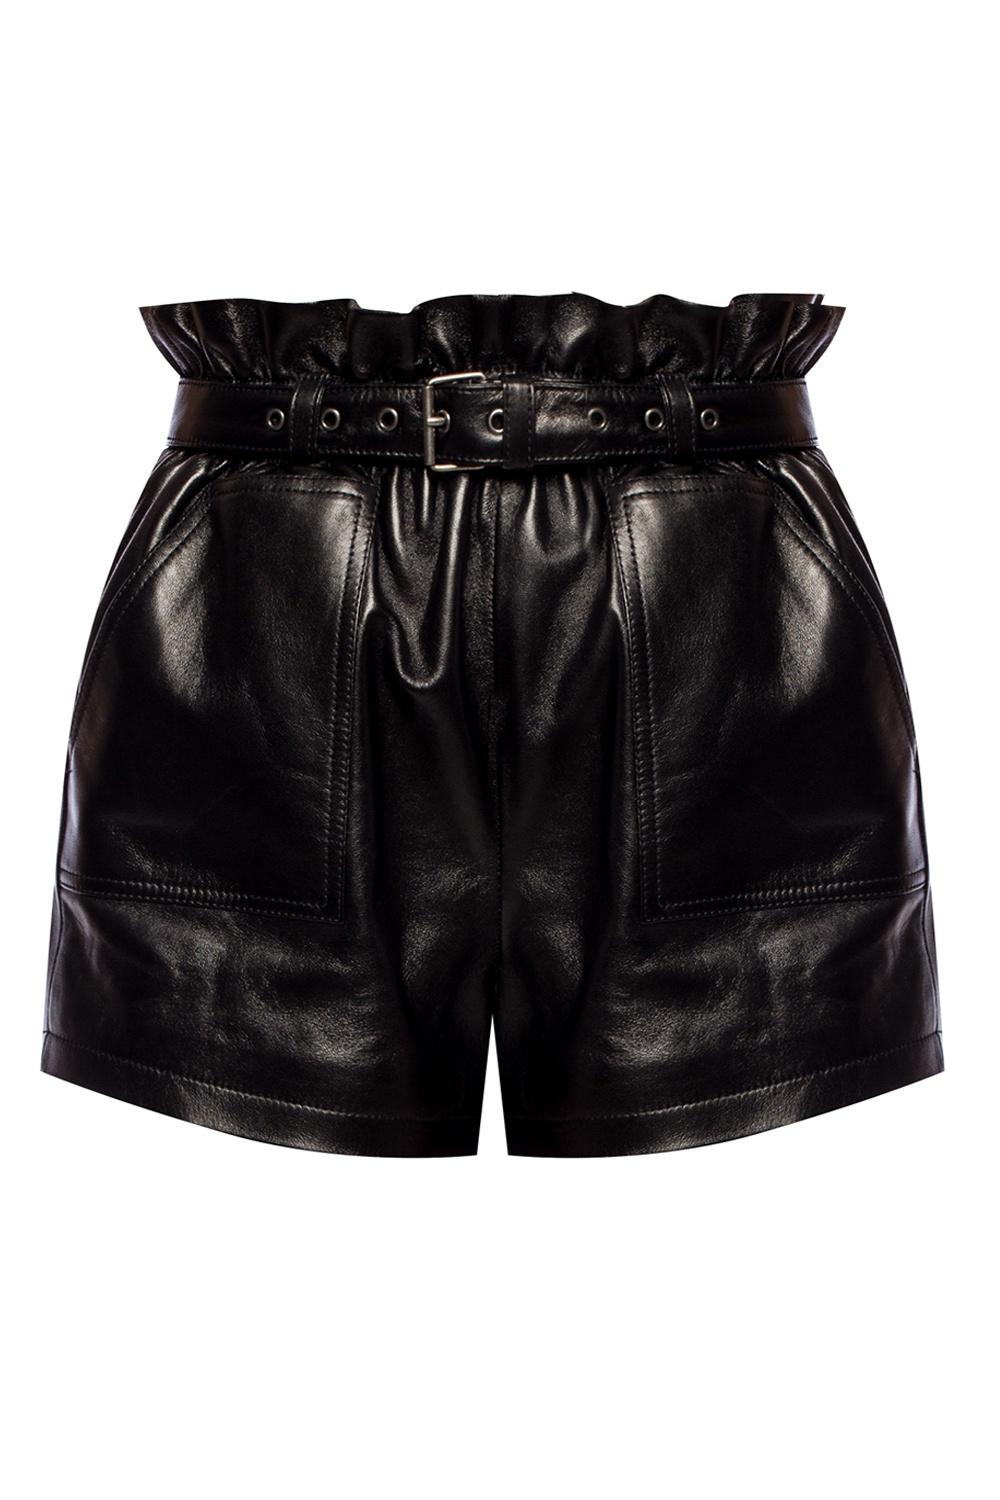 Saint Laurent Black High Waisted Belted Leather Shorts

These black Saint Laurent high waist leather shorts feature an elasticated waistband, buckled belt, front pockets and smooth lining. An elevated, classic piece for your inner rockstar. Brand